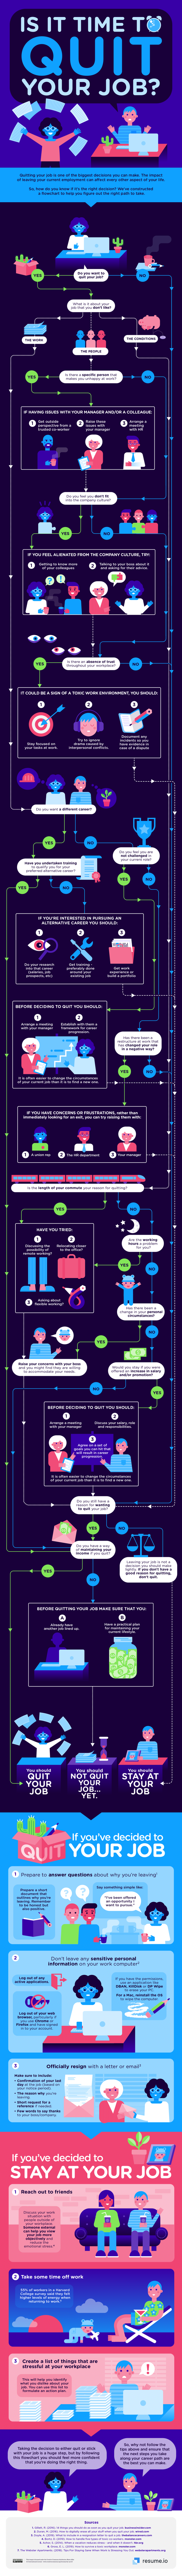 Is it Time to Quit Your Job Infographic